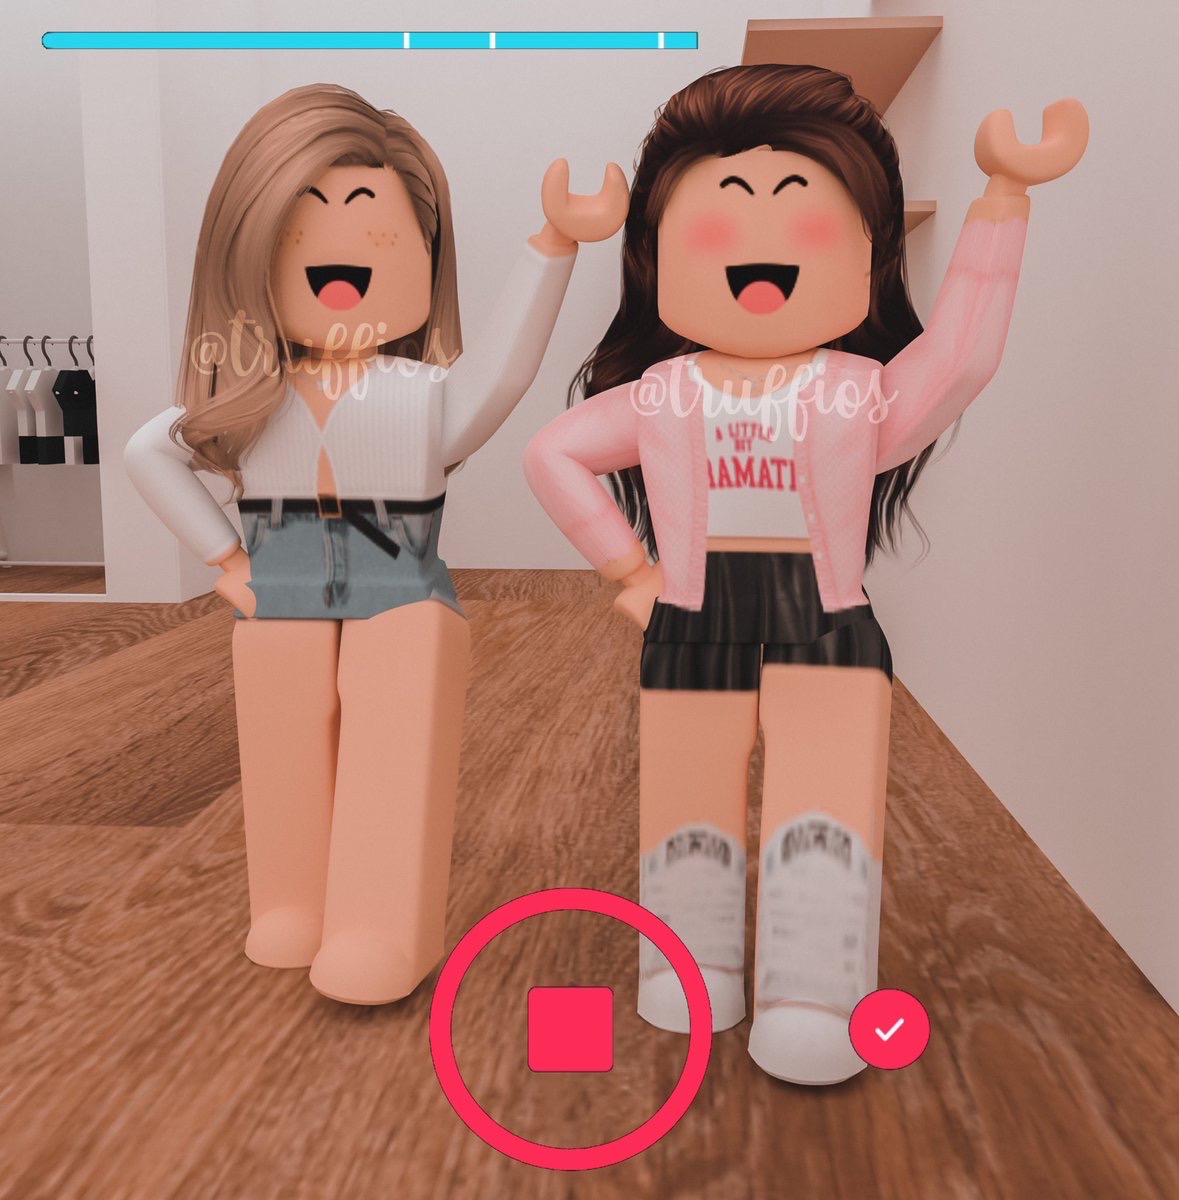 Aesthetic Cute Roblox Girl Image By 𝘊𝘩𝘦𝘳𝘳𝘺 - roblox woman avater